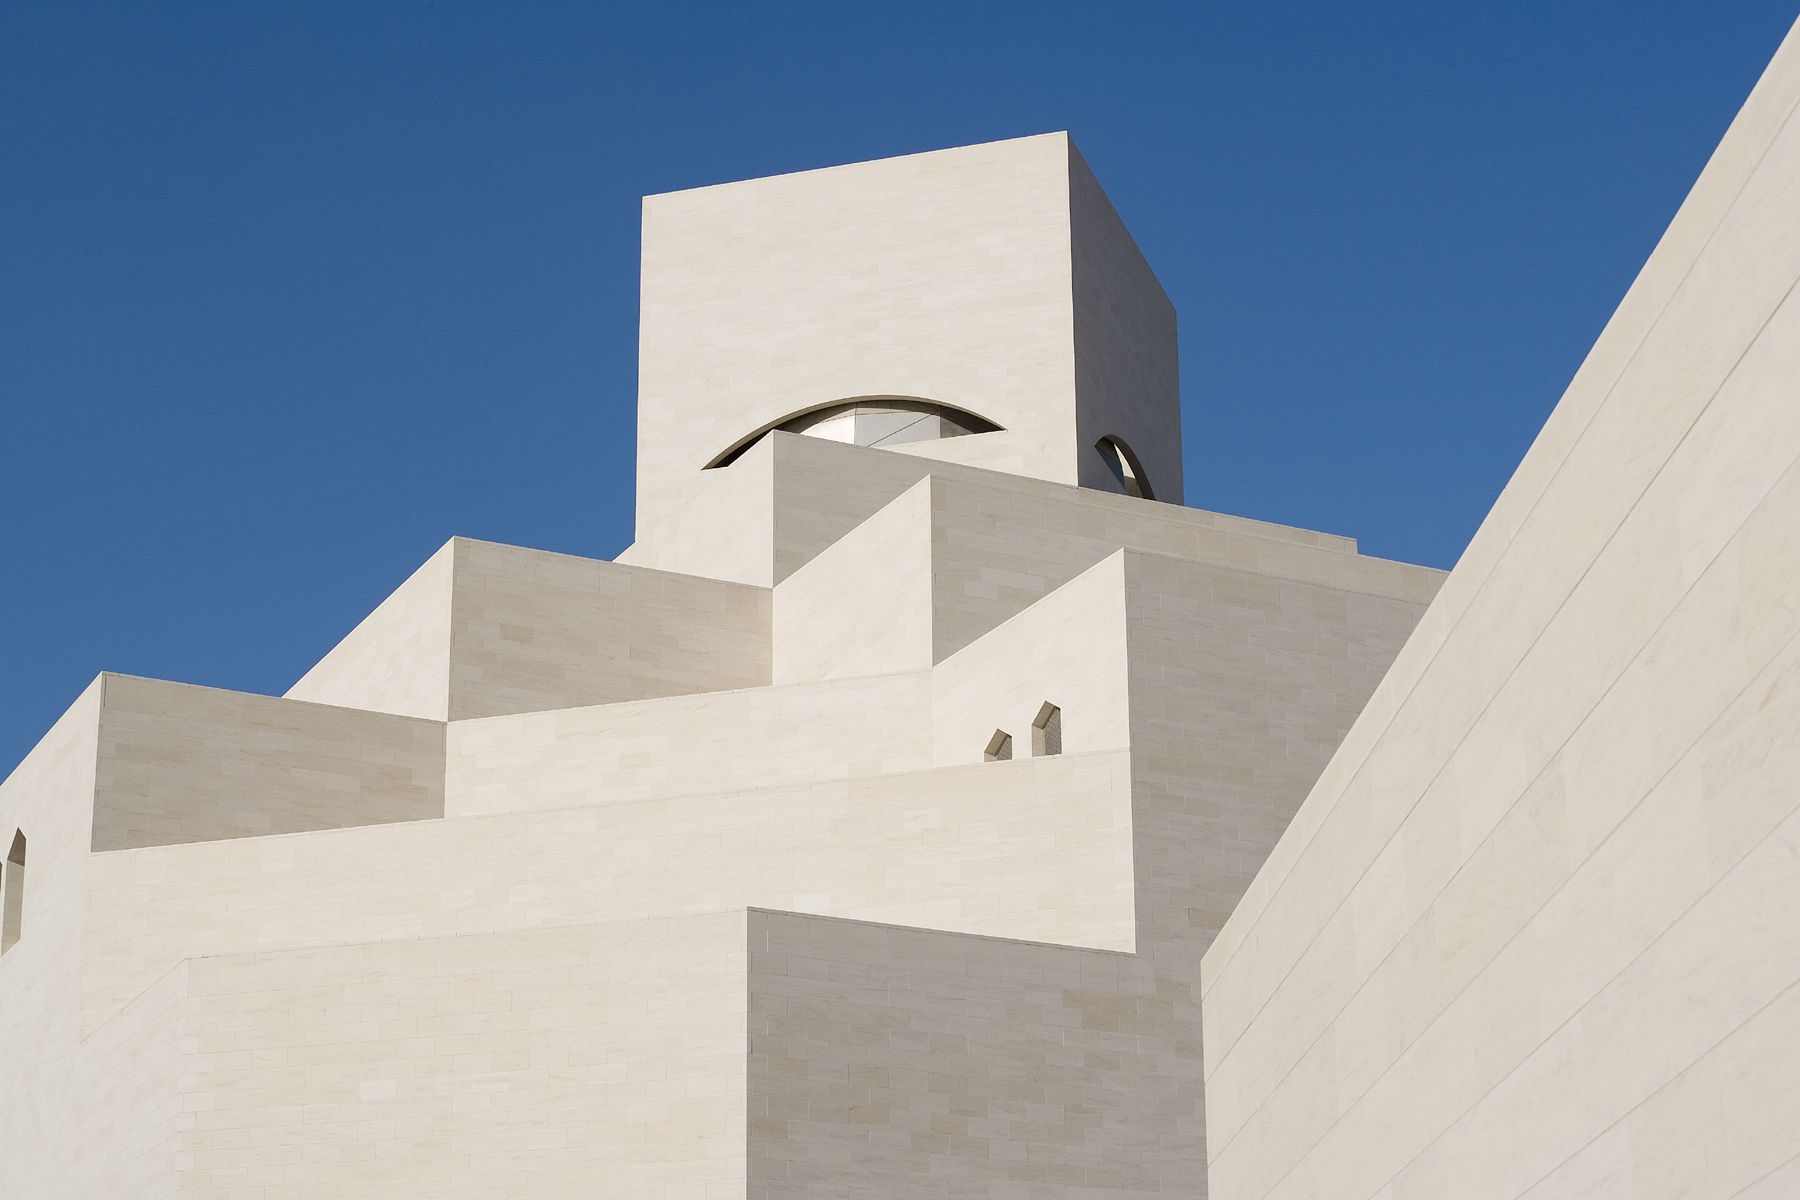 The unique architecture of the Museum of Islamic Art, with tiered blocks of pale stone against a bright blue sky.